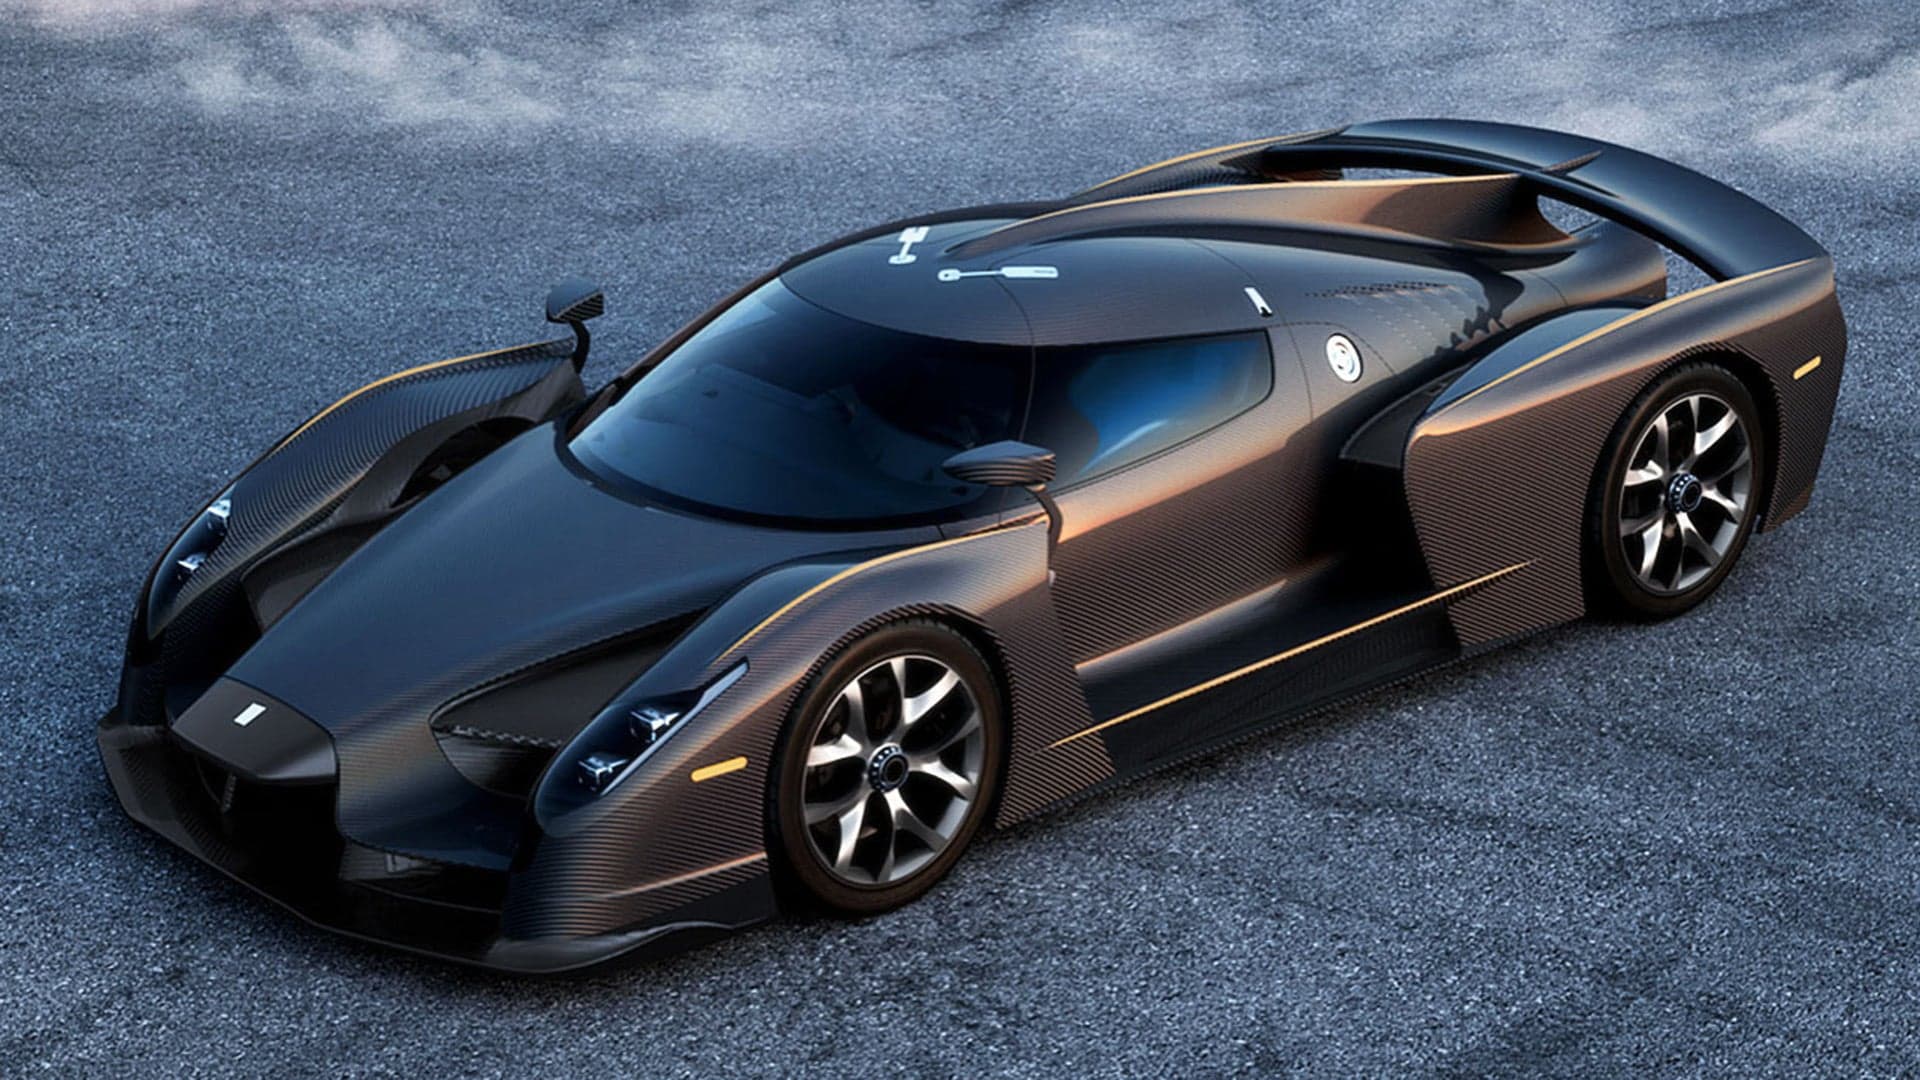 Jim Glickenhaus’s Supercar Could Lap the Nurburgring in 6:30—On Street Tires